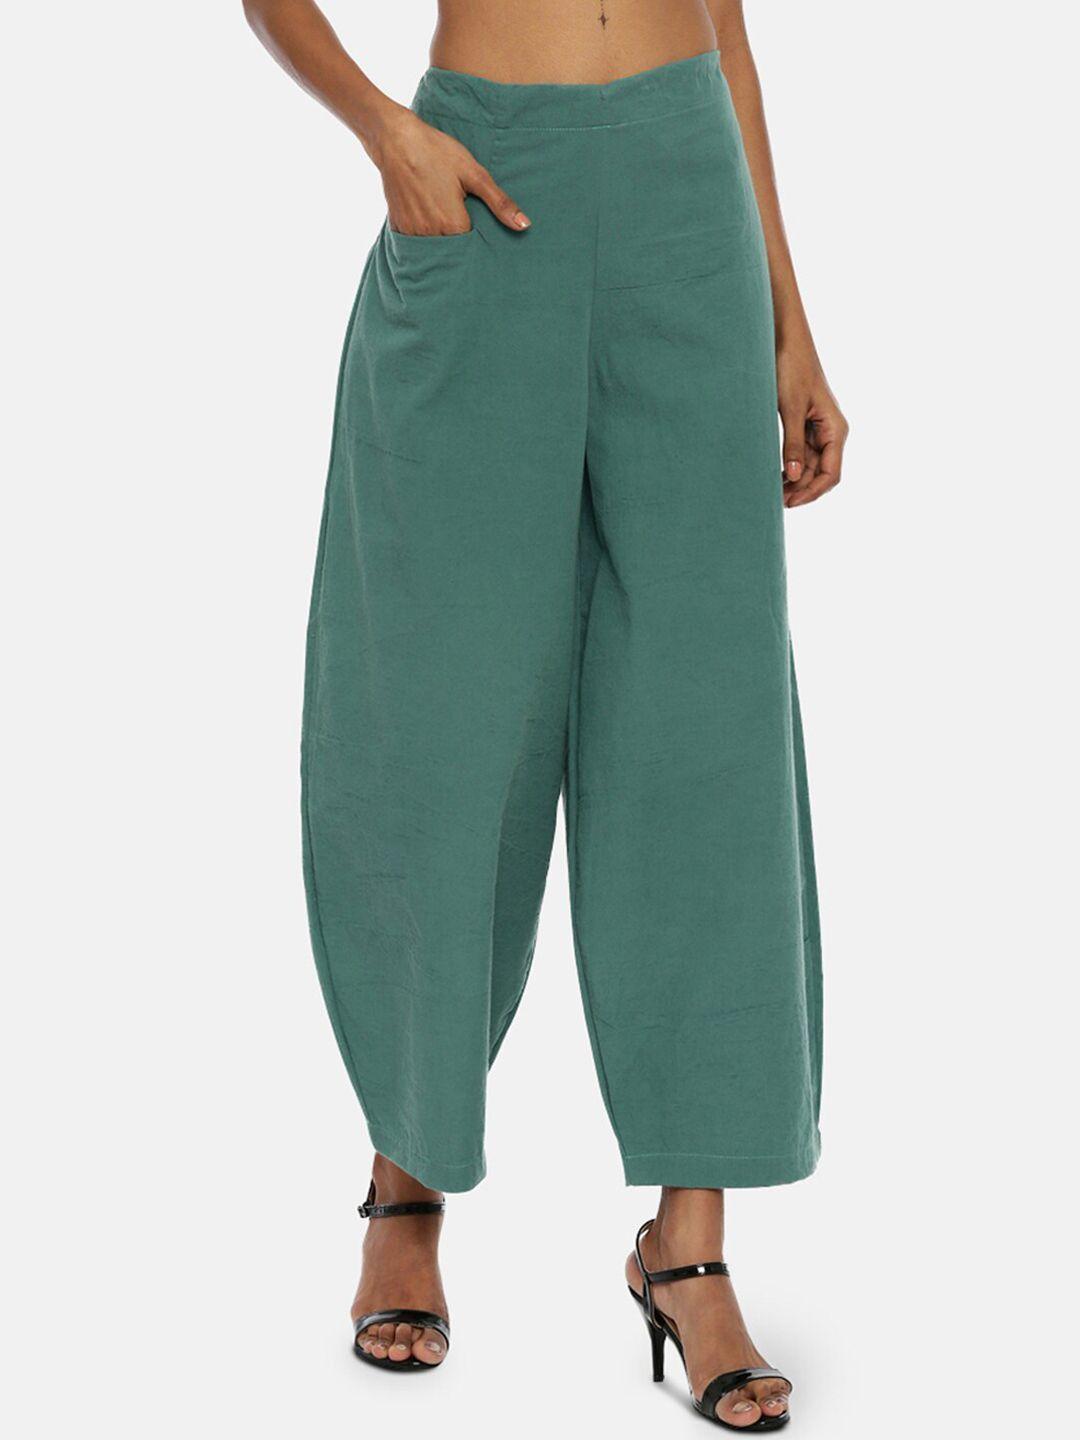 grass by gitika goyal women solid green parallel trousers